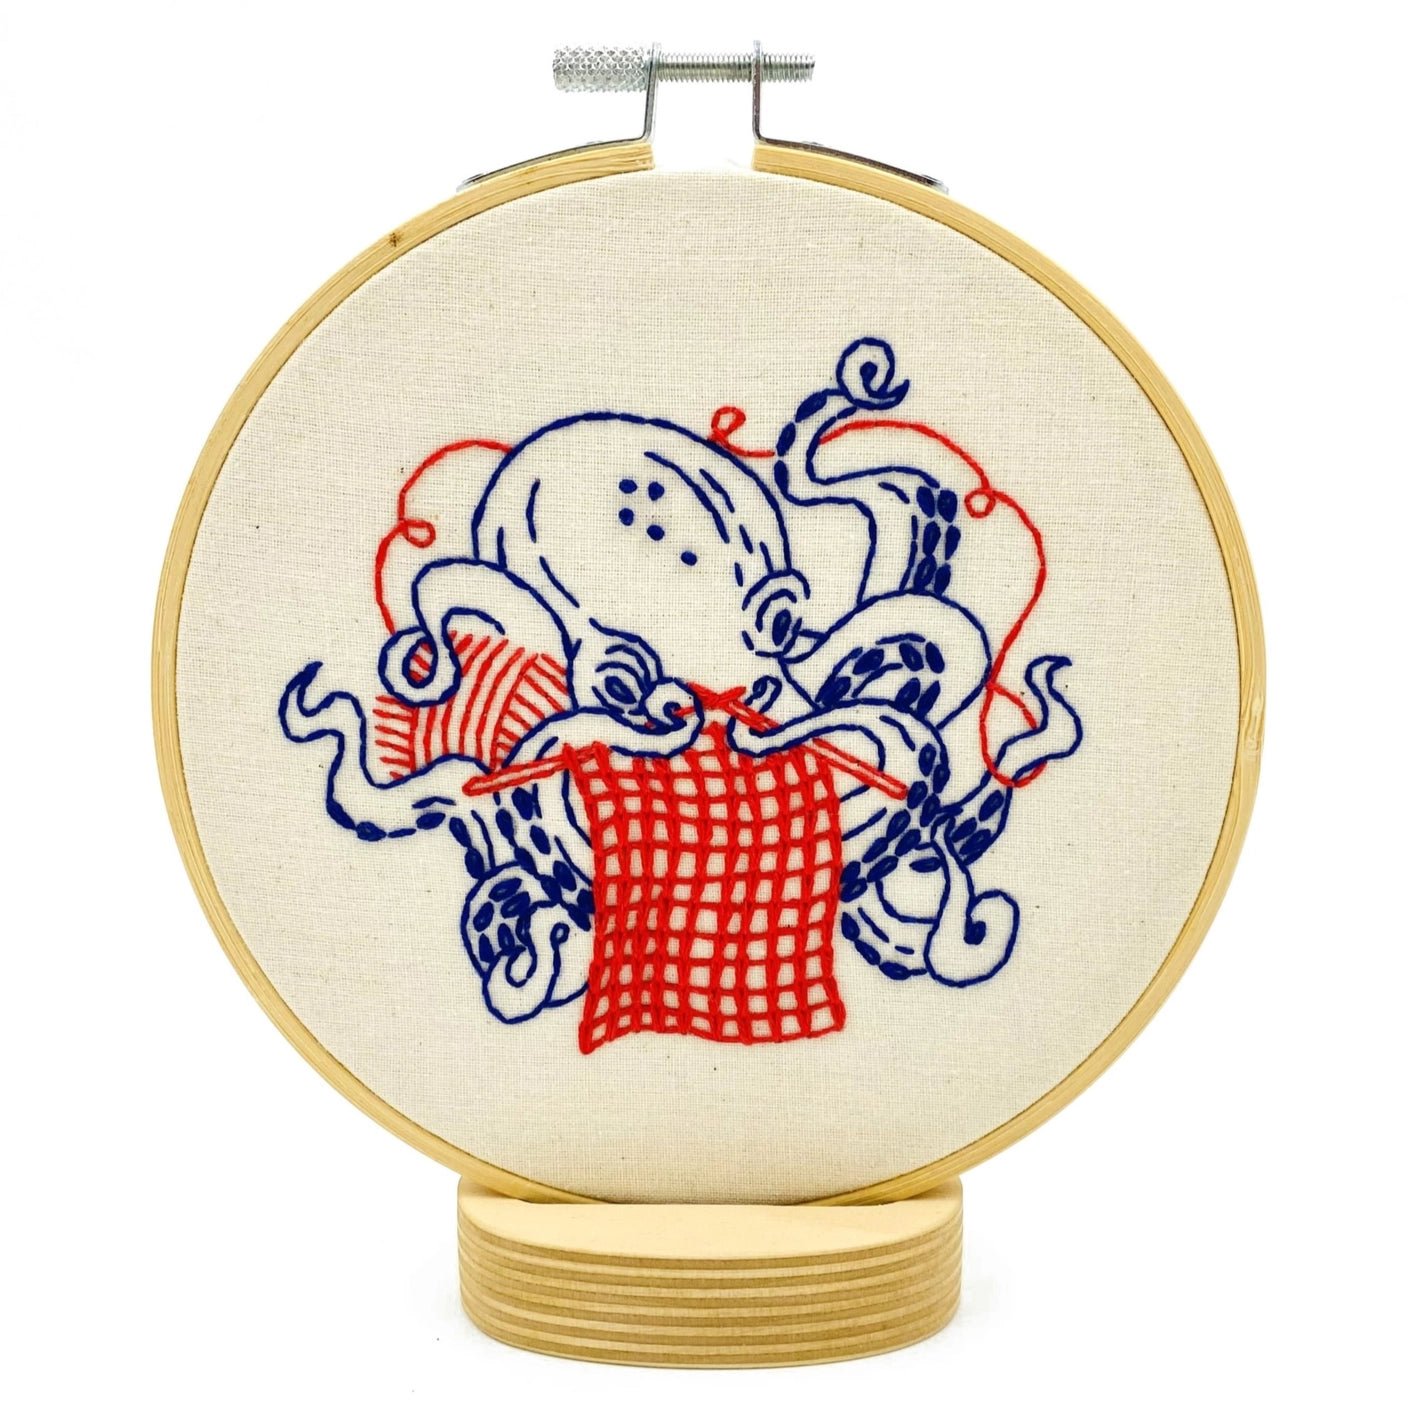 Knitting Octopus Complete Embroidery Kit - Hook, Line, &amp; Tinker Embroidery Kits - The Little Yarn Store